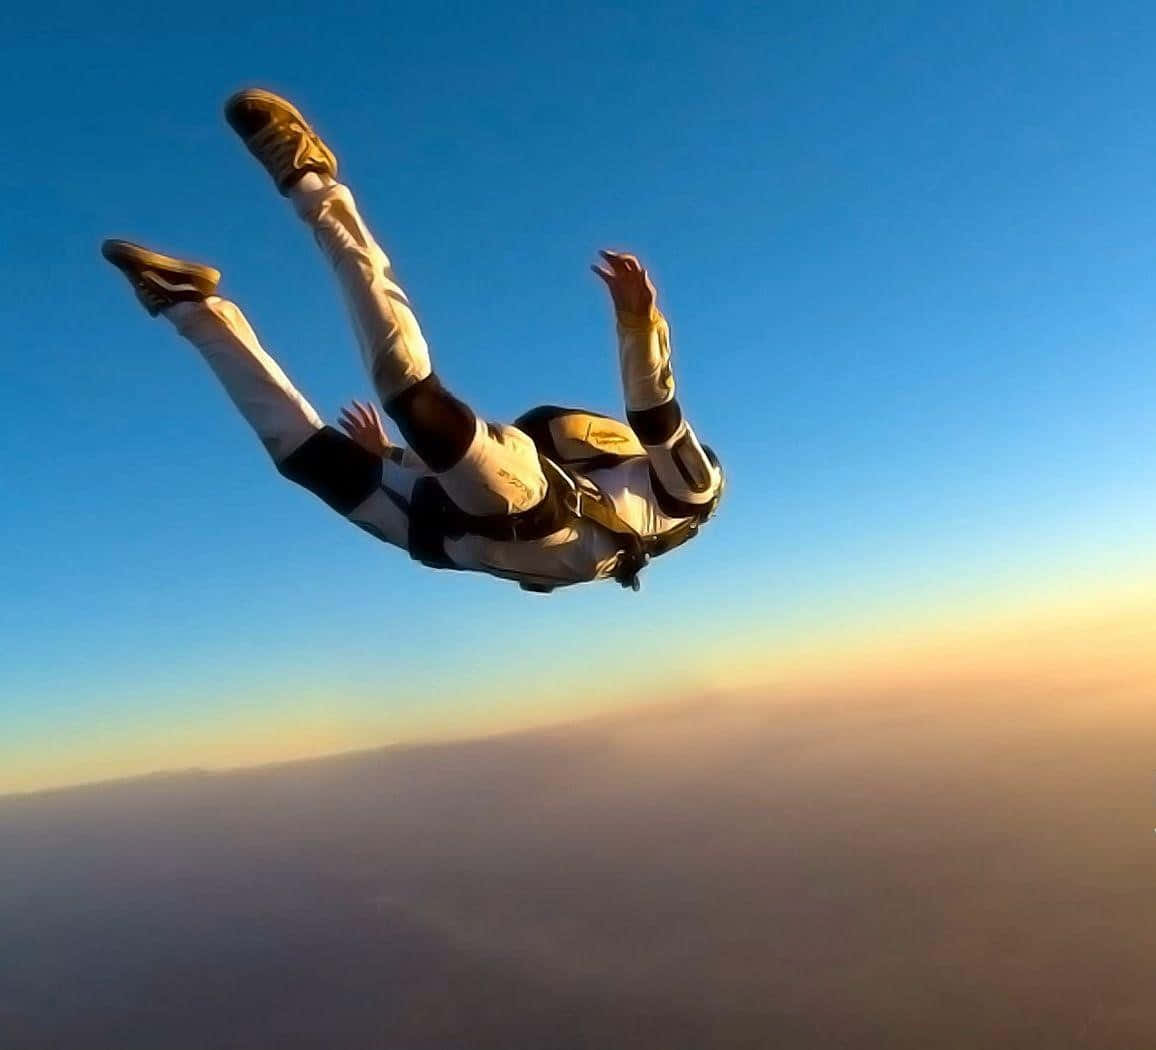 A thrilling experience - skydiving!